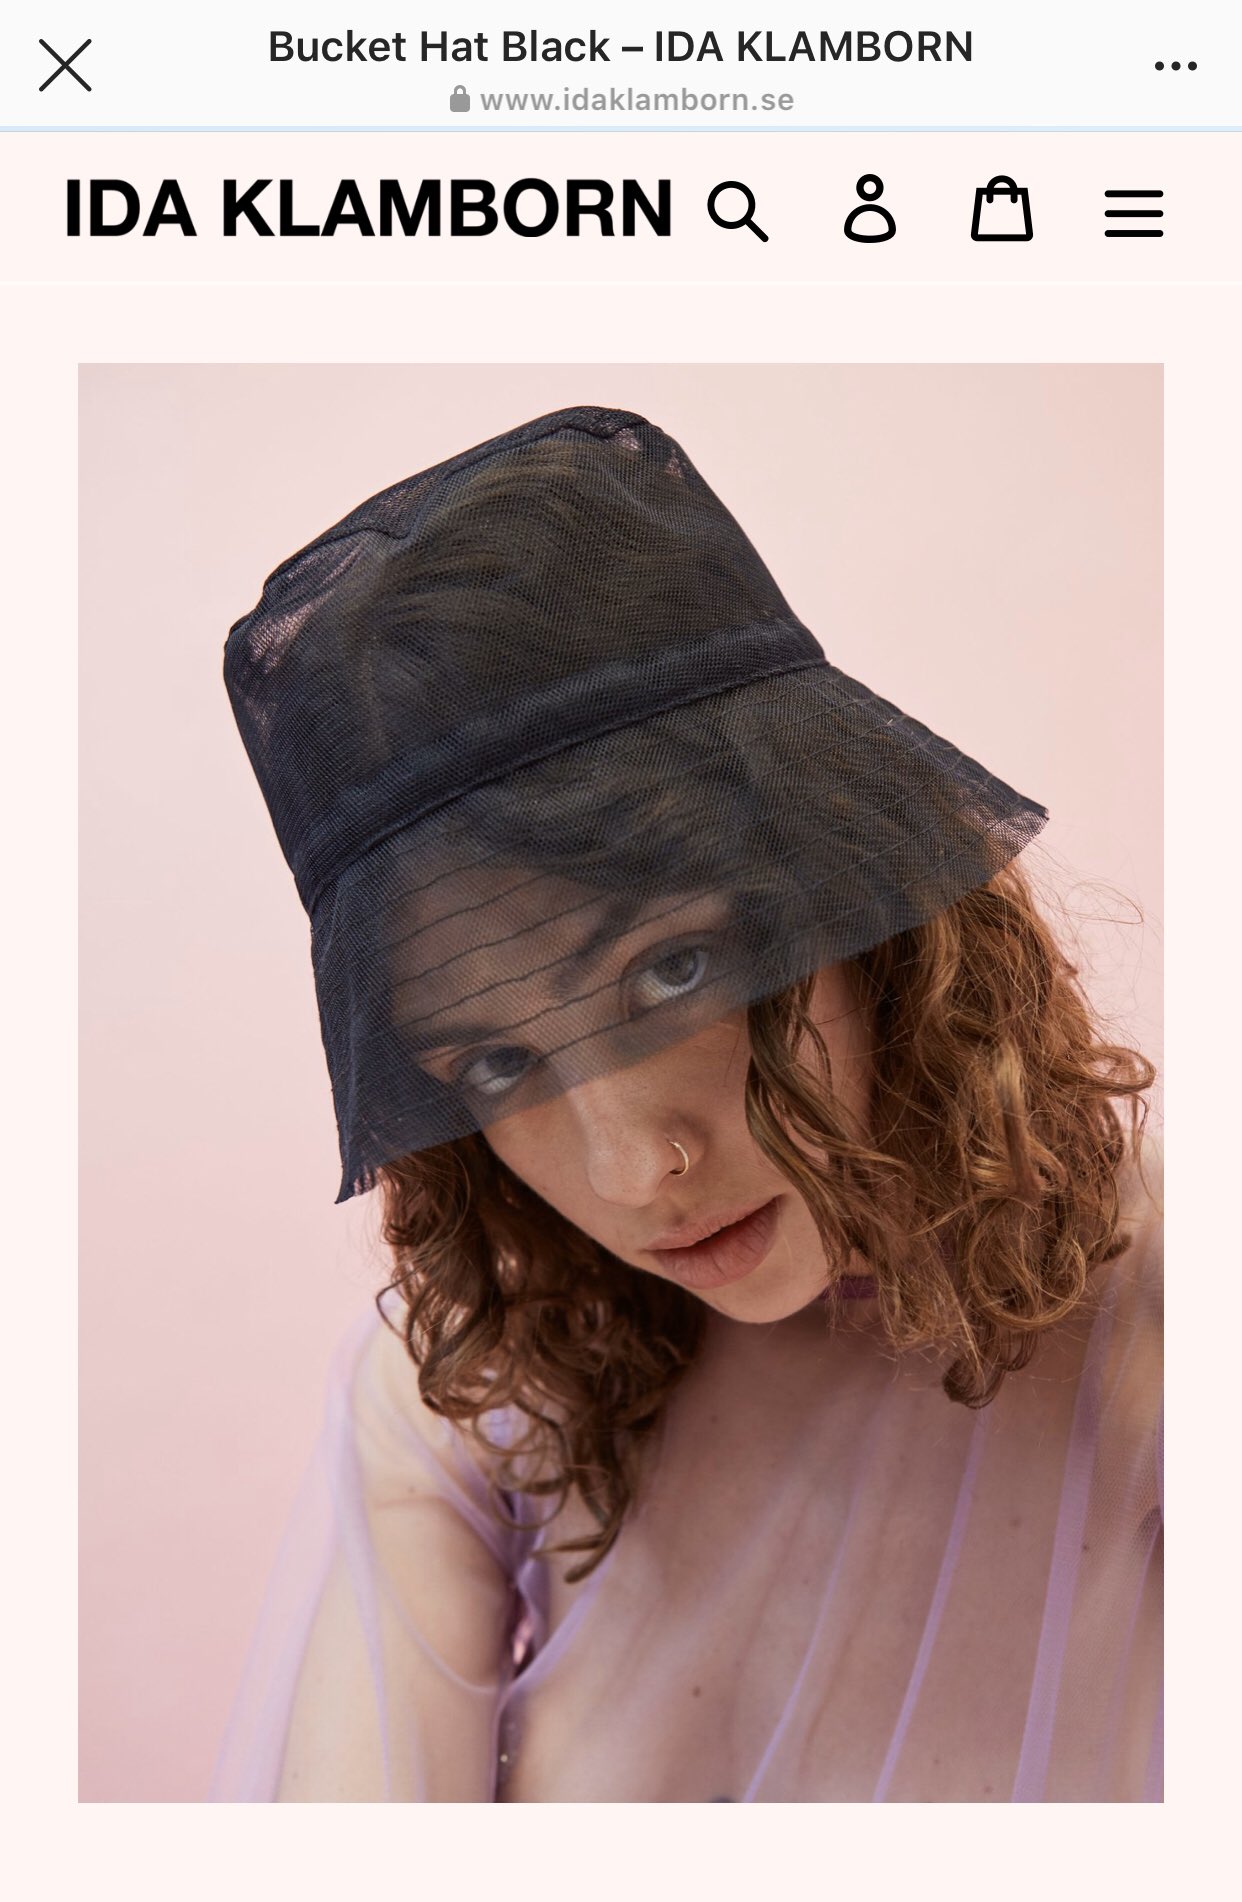 Forord Kontrovers lærebog Gibson Johns on Twitter: "Update: Leah McSweeney is working on making her  iconic bucket hat, which is sold out via original designer Ida Klamborn's  website, available for purchase. #RHONY https://t.co/HlgaJG2x0m" / Twitter